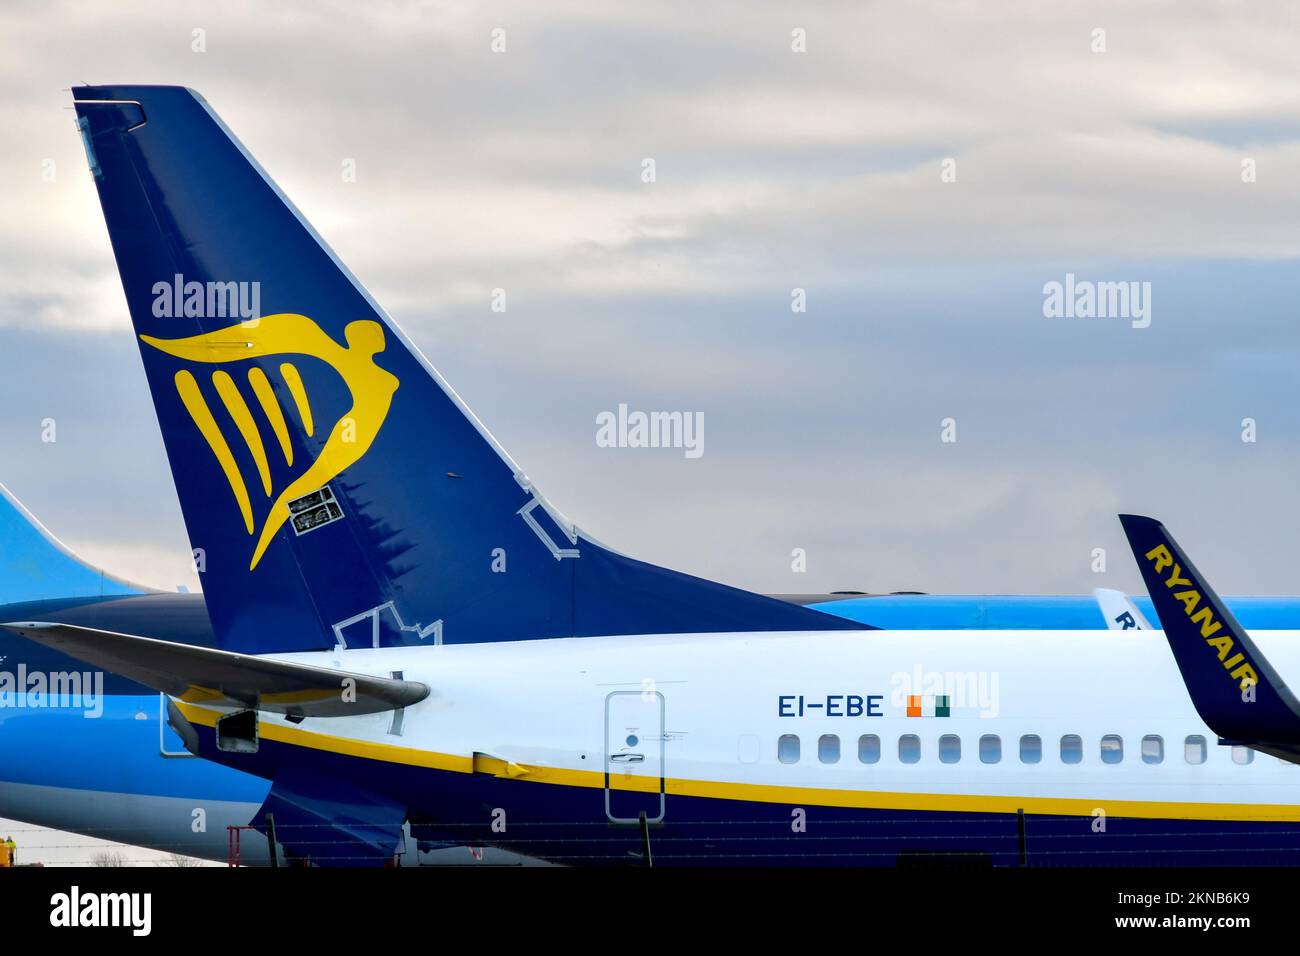 St Athan, Wales - November 2022: Tail fin and winglet of a Ryanair Boeing 737 parked outside the hangar of the Caerdav aviation maintenance facility Stock Photo